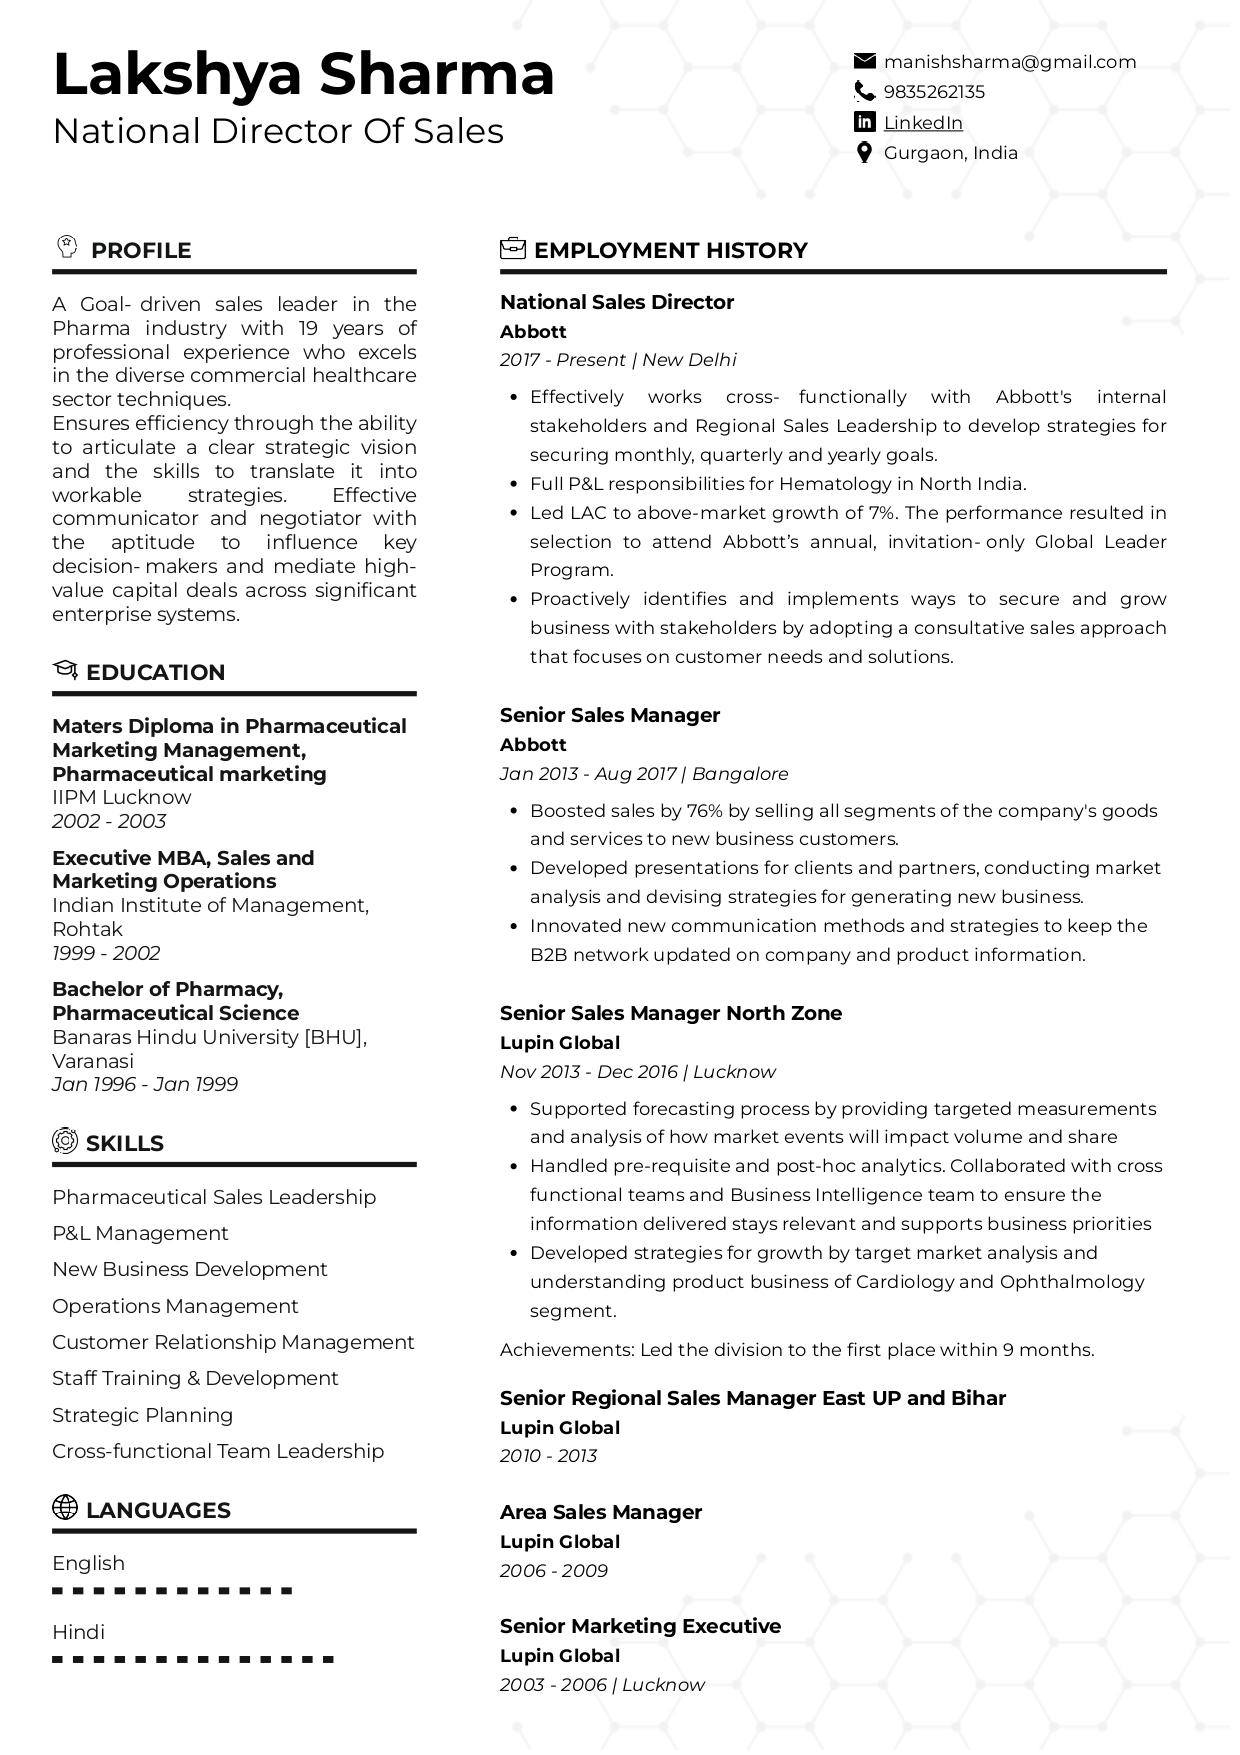 Resume of National Director of Sales built on Resumod